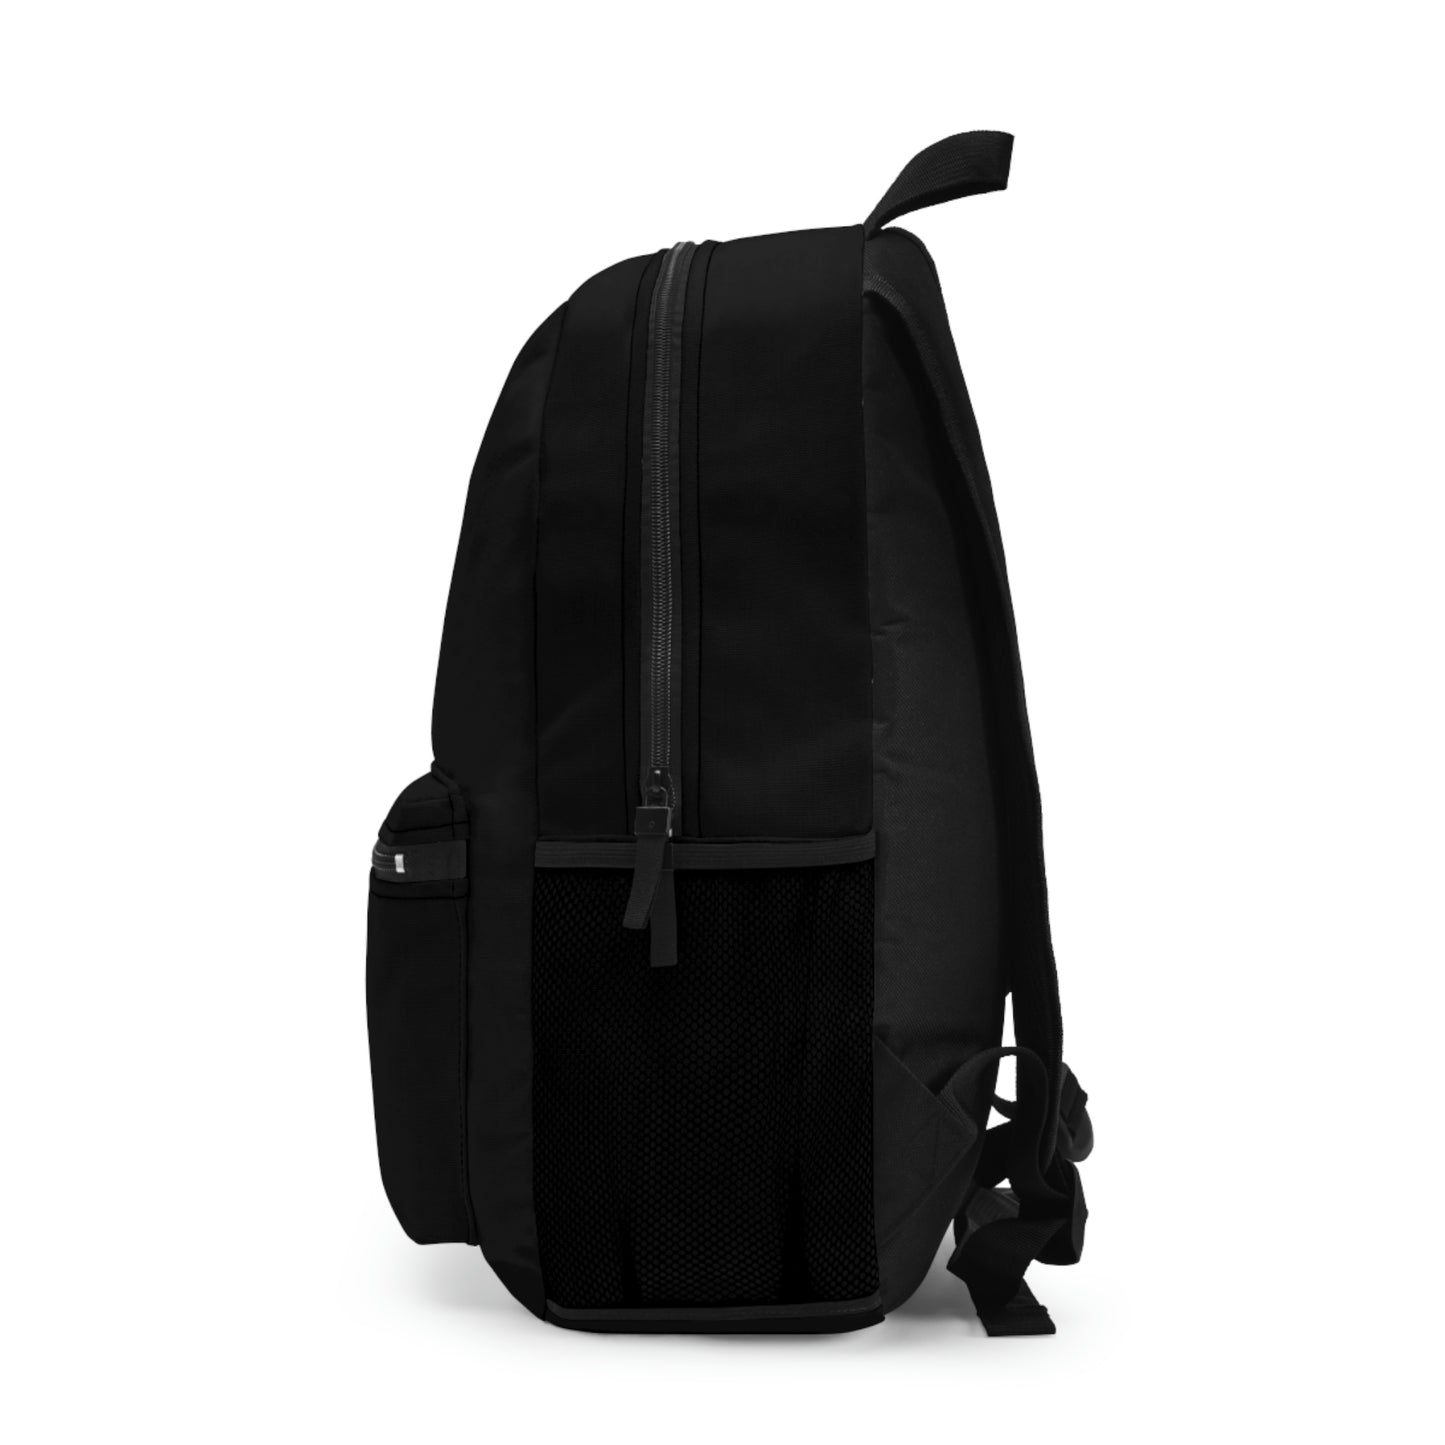 Copy of Backpack (Made in USA)